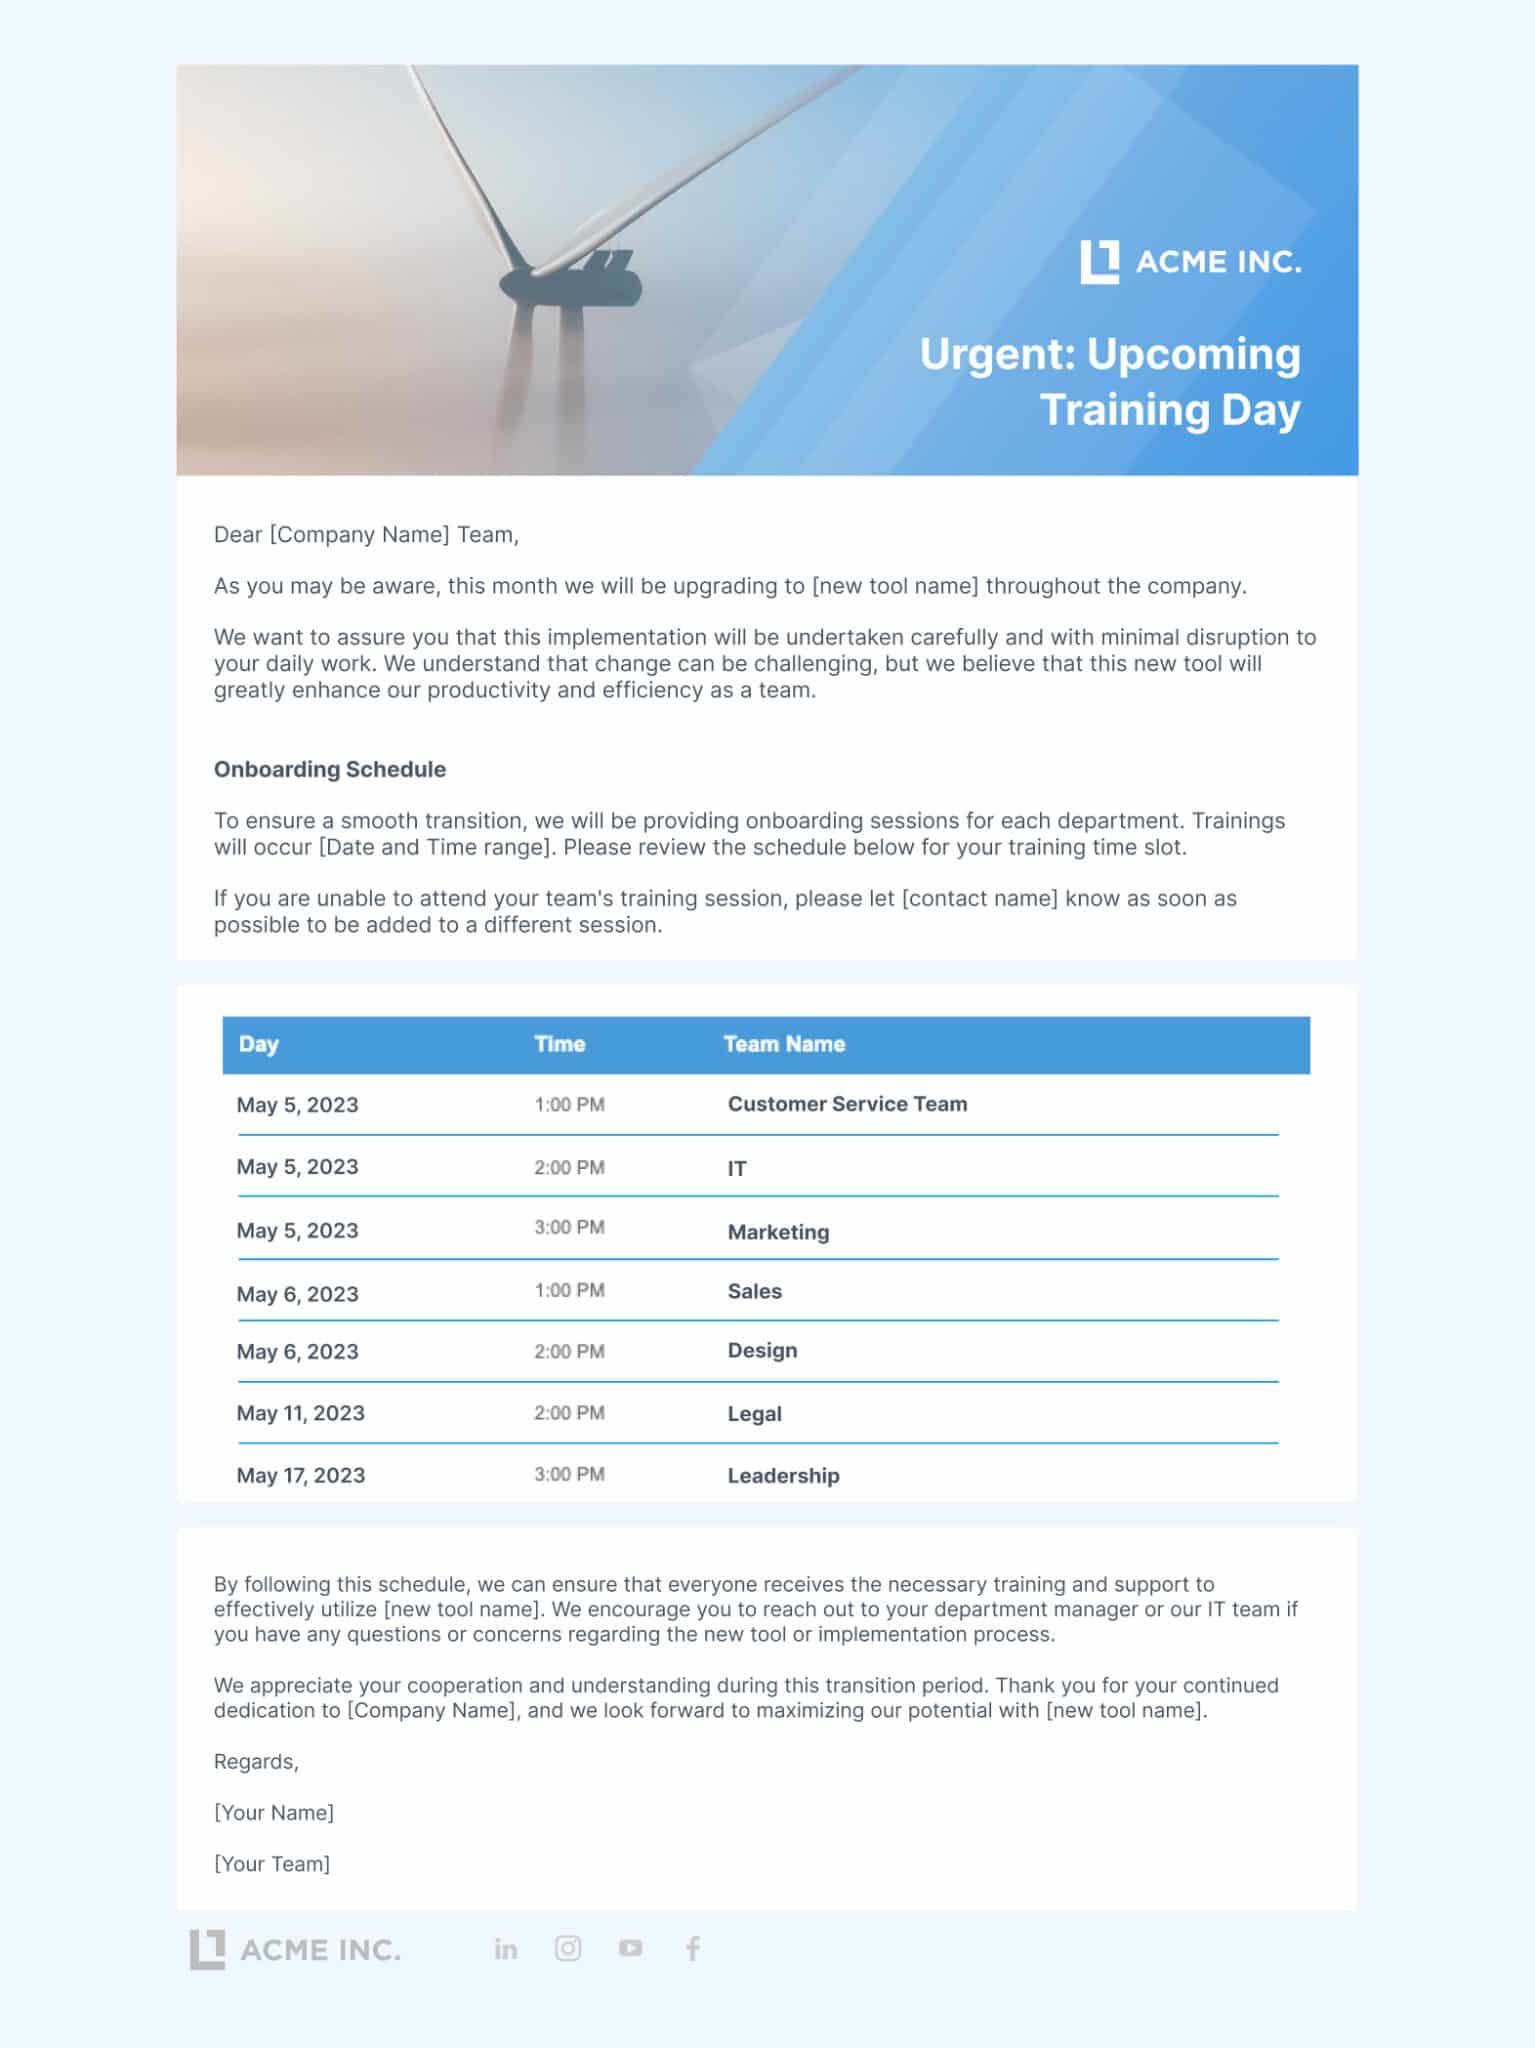 Sample change management email template which shows sample copy informing employees of upcoming training on a new tool being implemented. 